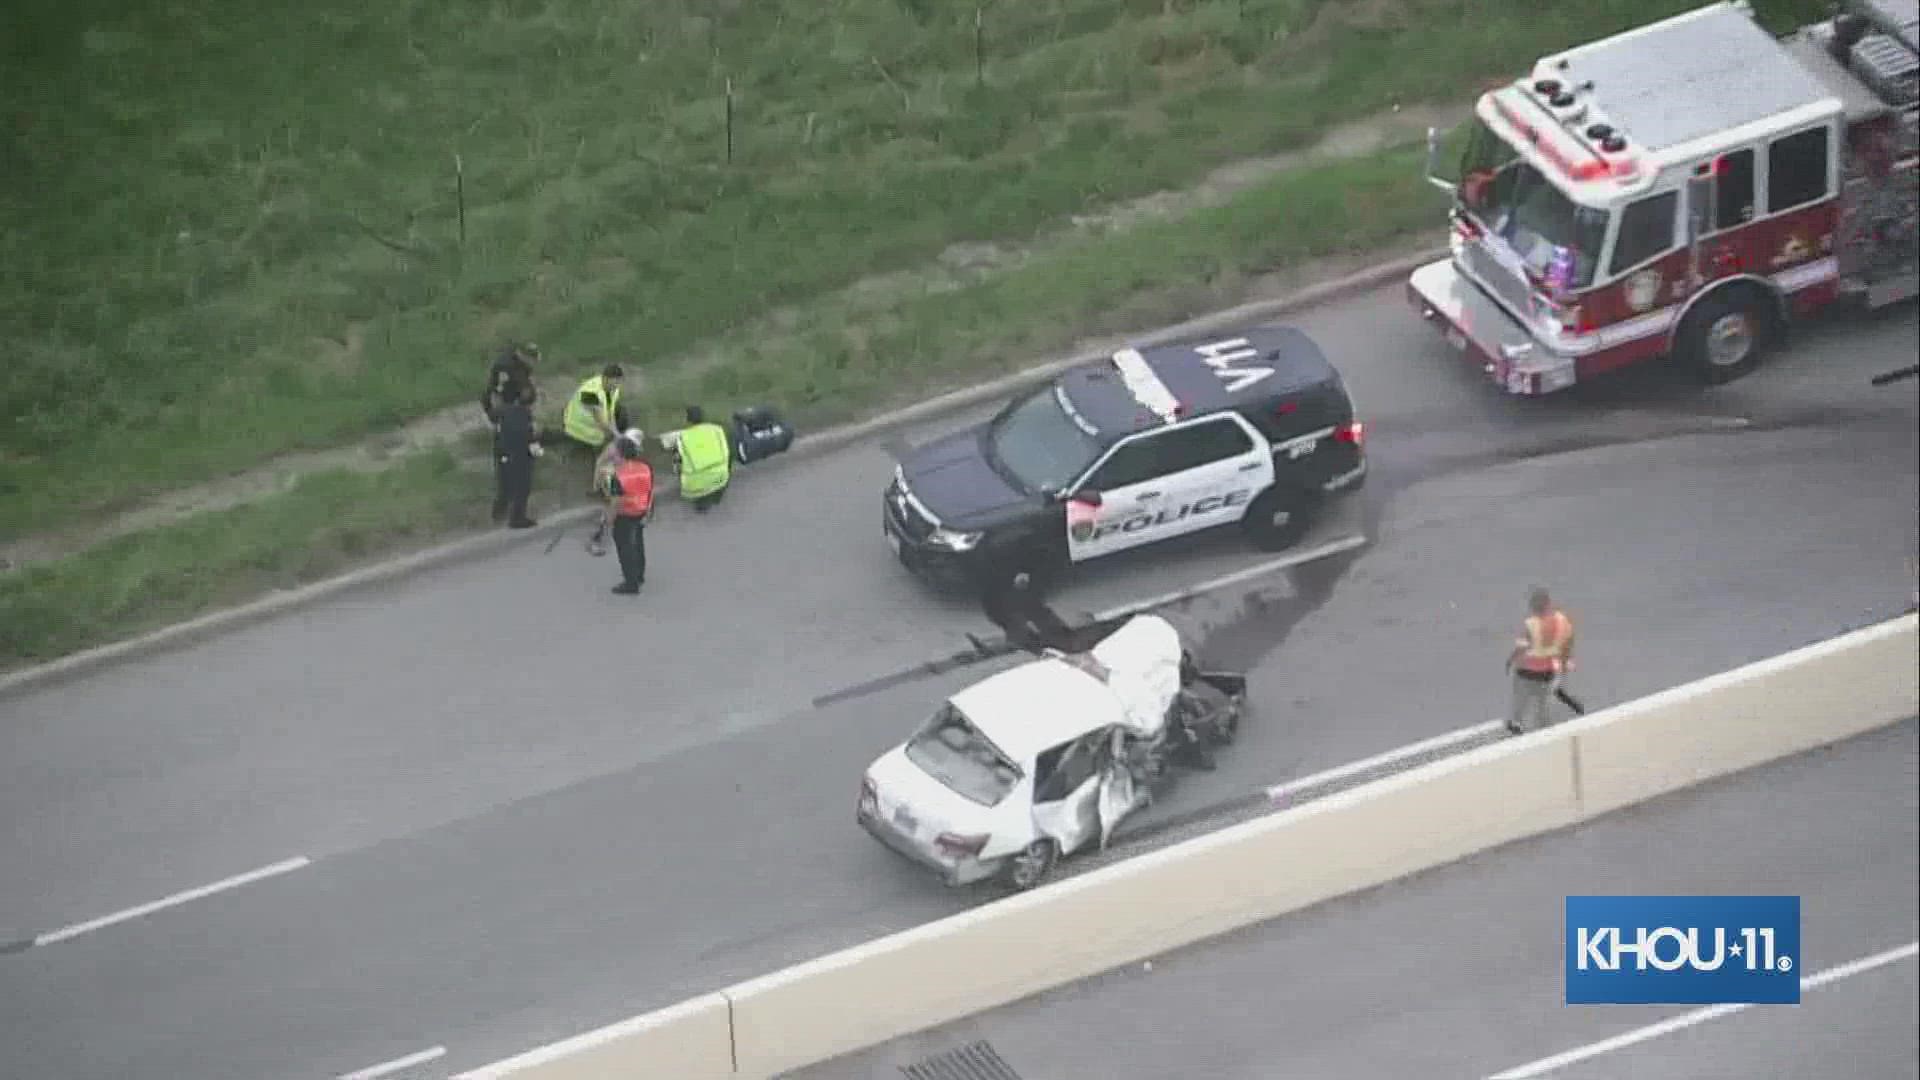 A high-speed chase ended in a multi-vehicle crash along the Gulf Freeway heading south in the Clear Lake area Monday morning.